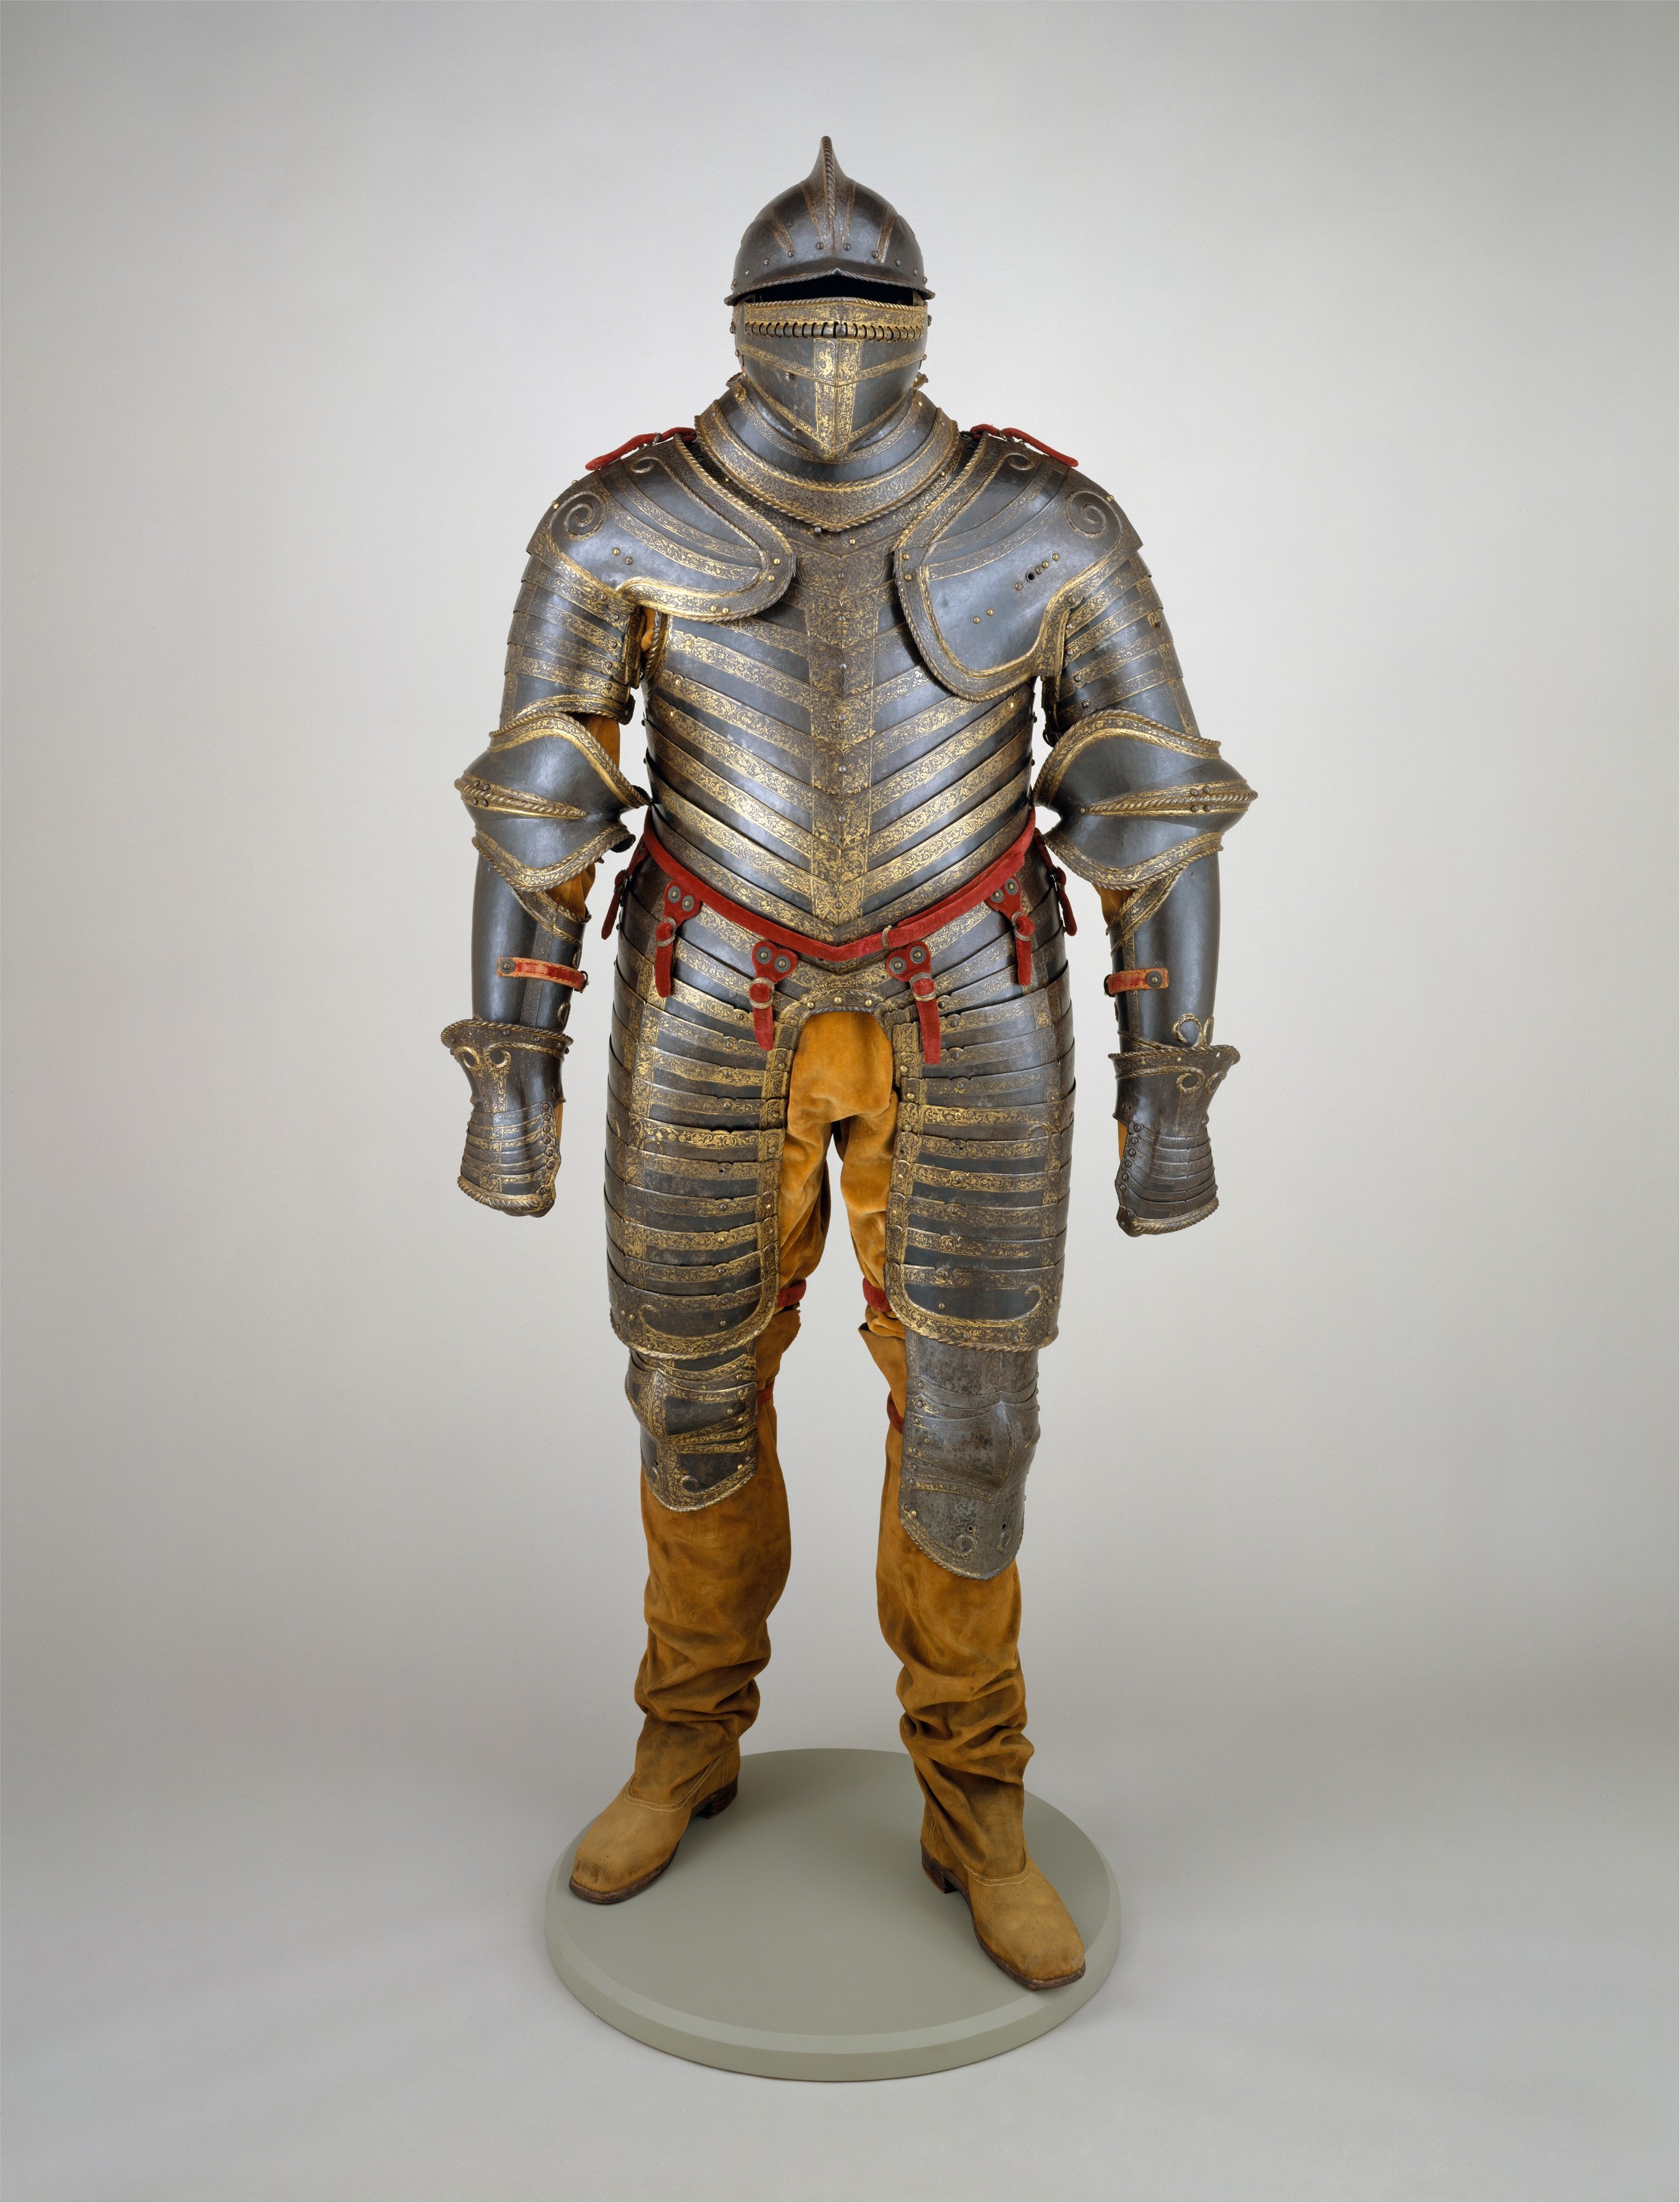 Field Armor of King Henry VIII of England (reigned 1509–47 